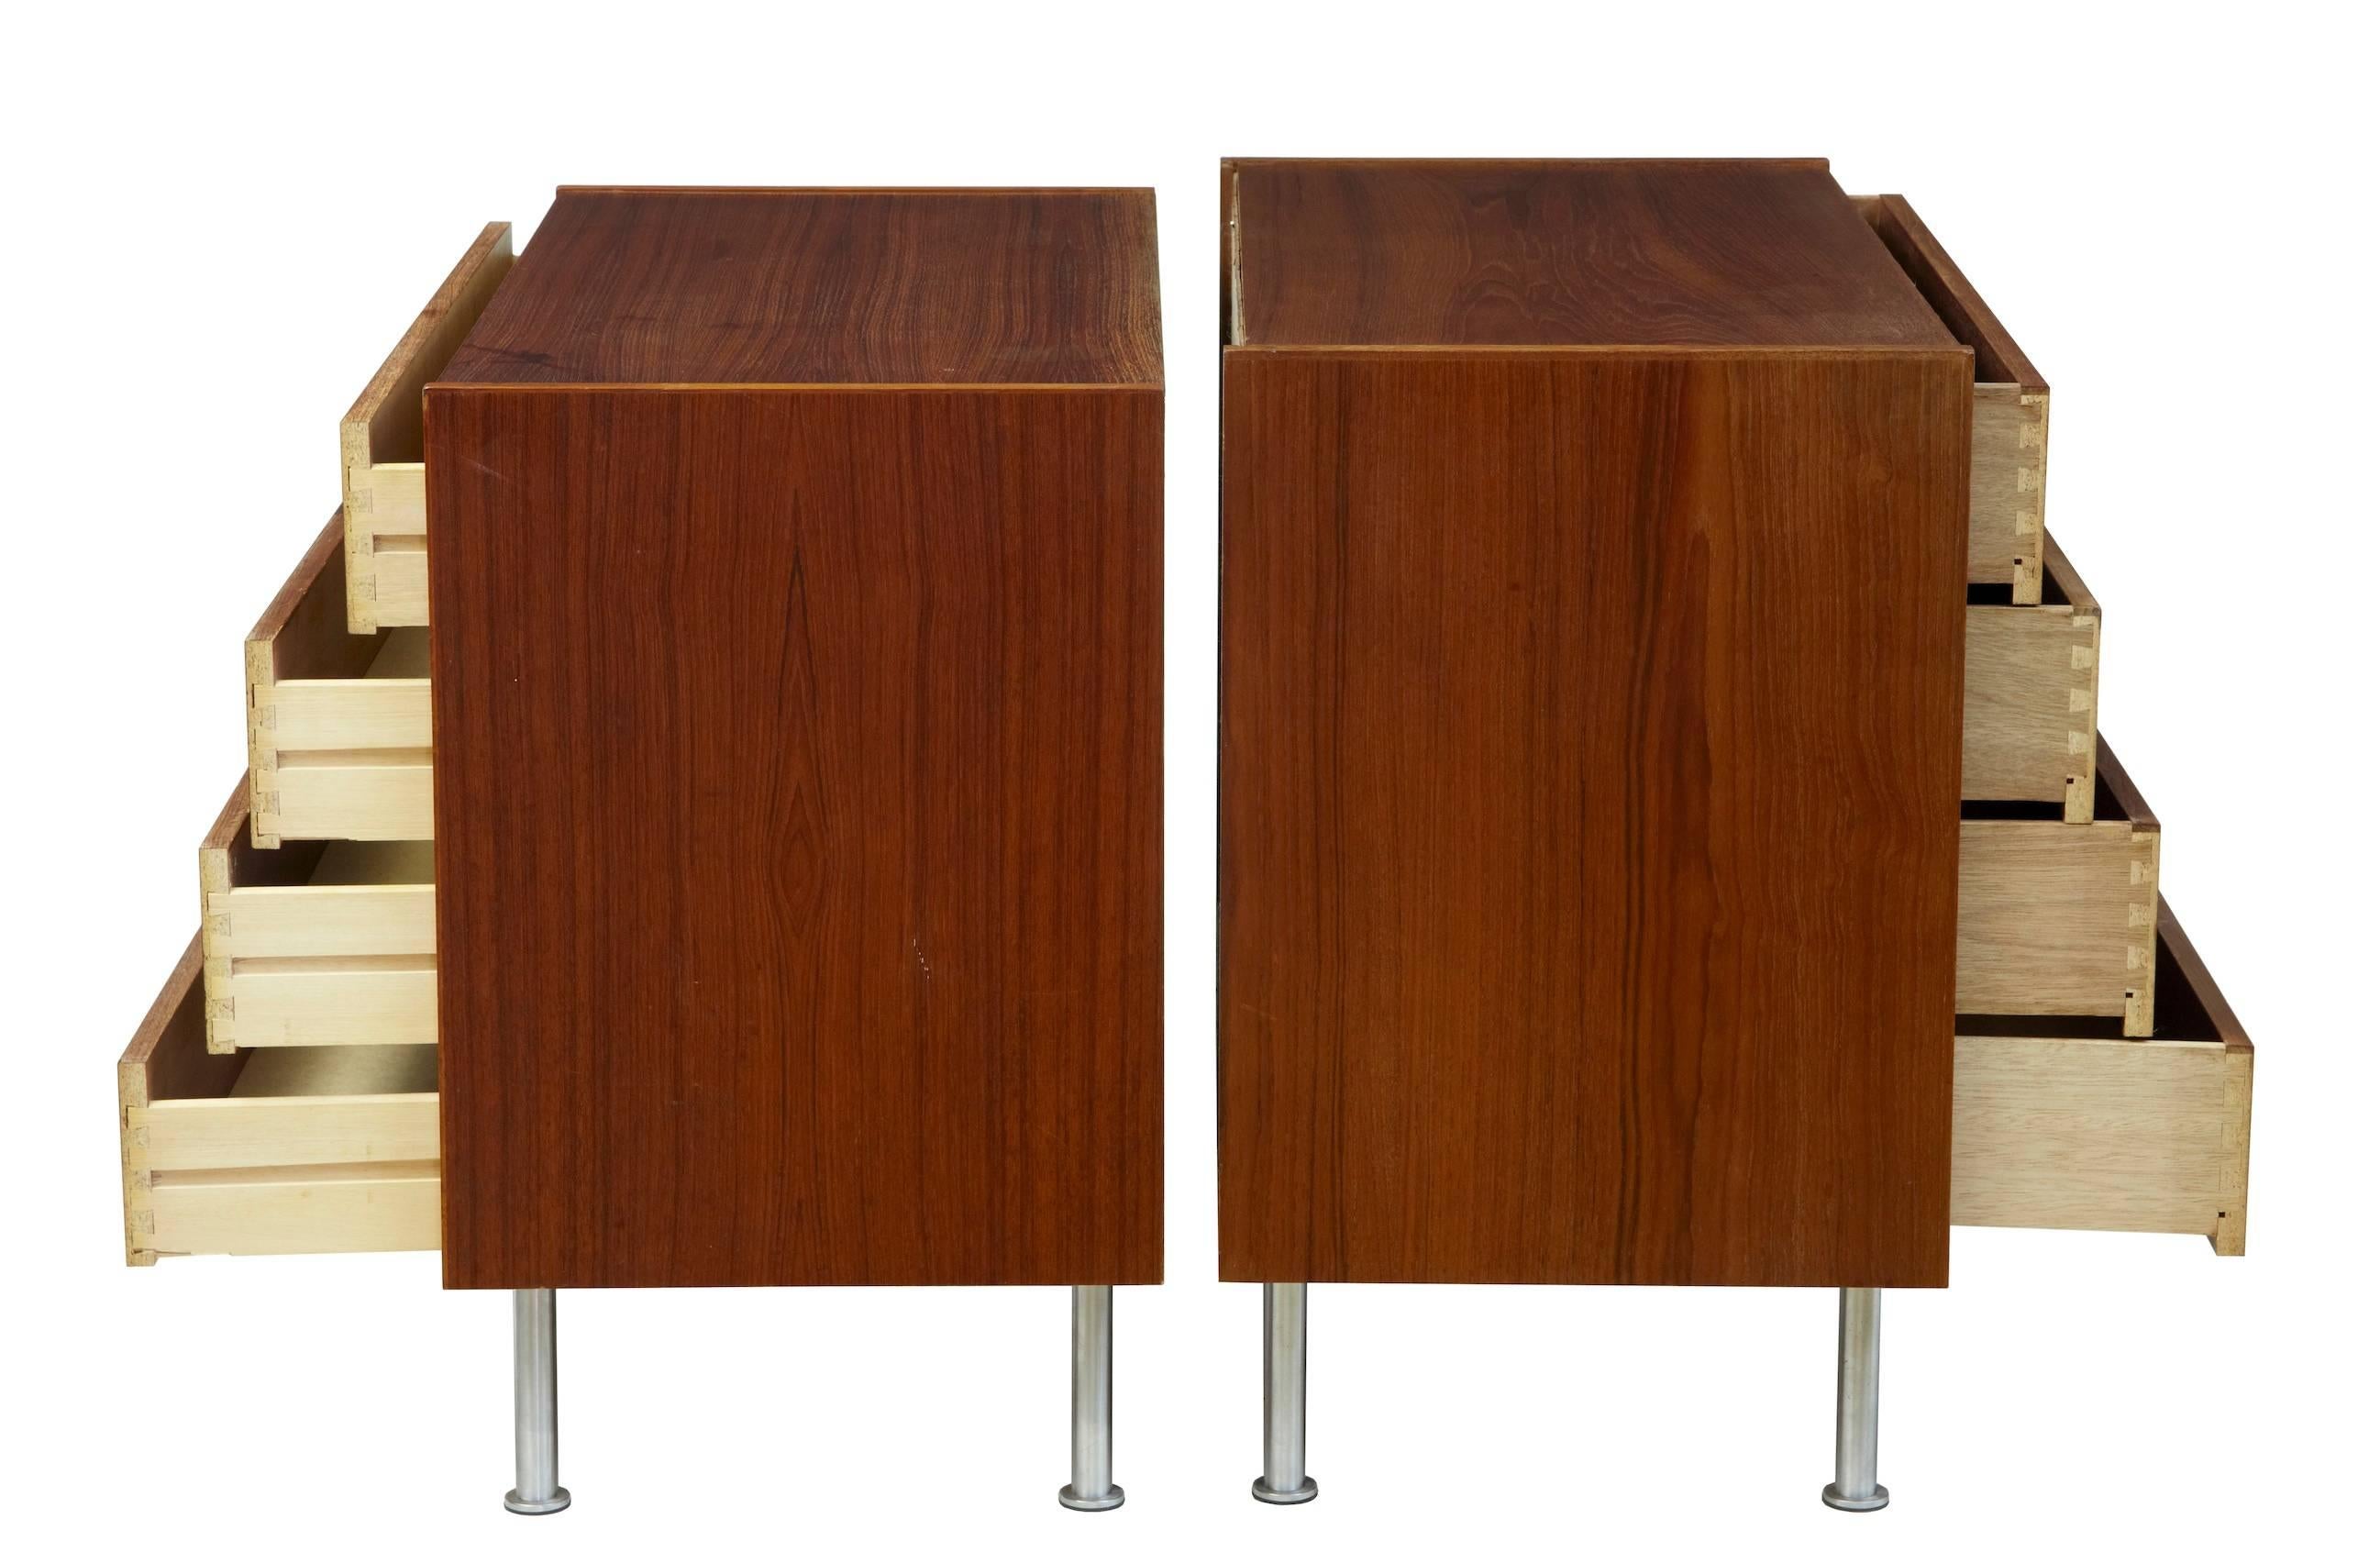 Very near pair of teak chest of drawers, circa 1970.
Four-drawer modern design chests, with recessed wooden handles.
Standing on tubular legs.
Some marking and staining to surfaces.

Measure: Height 27 1/4